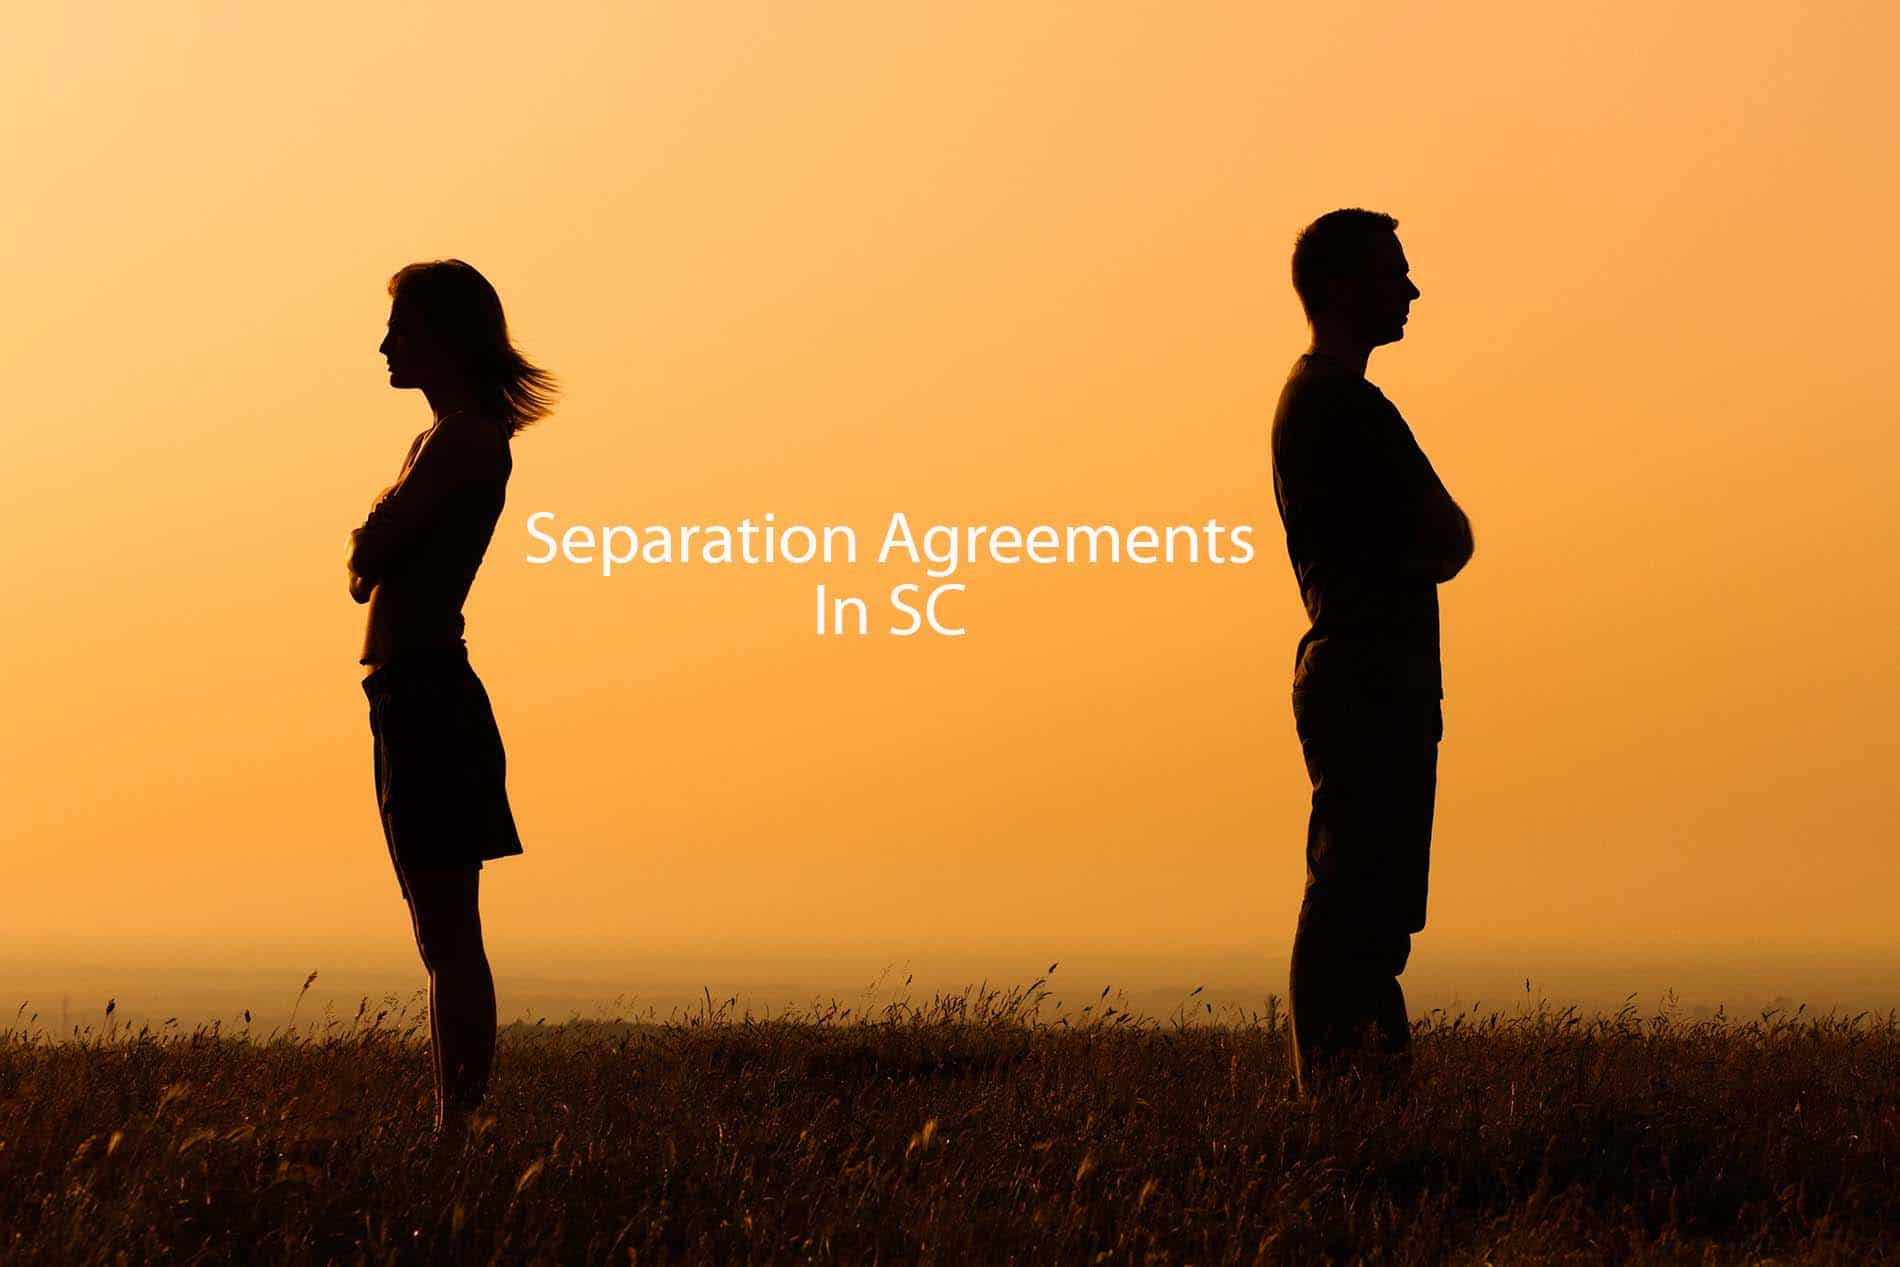 Woman and a man facing away from each other in a field at sunset with the words "Separation Agreements In SC" between them.